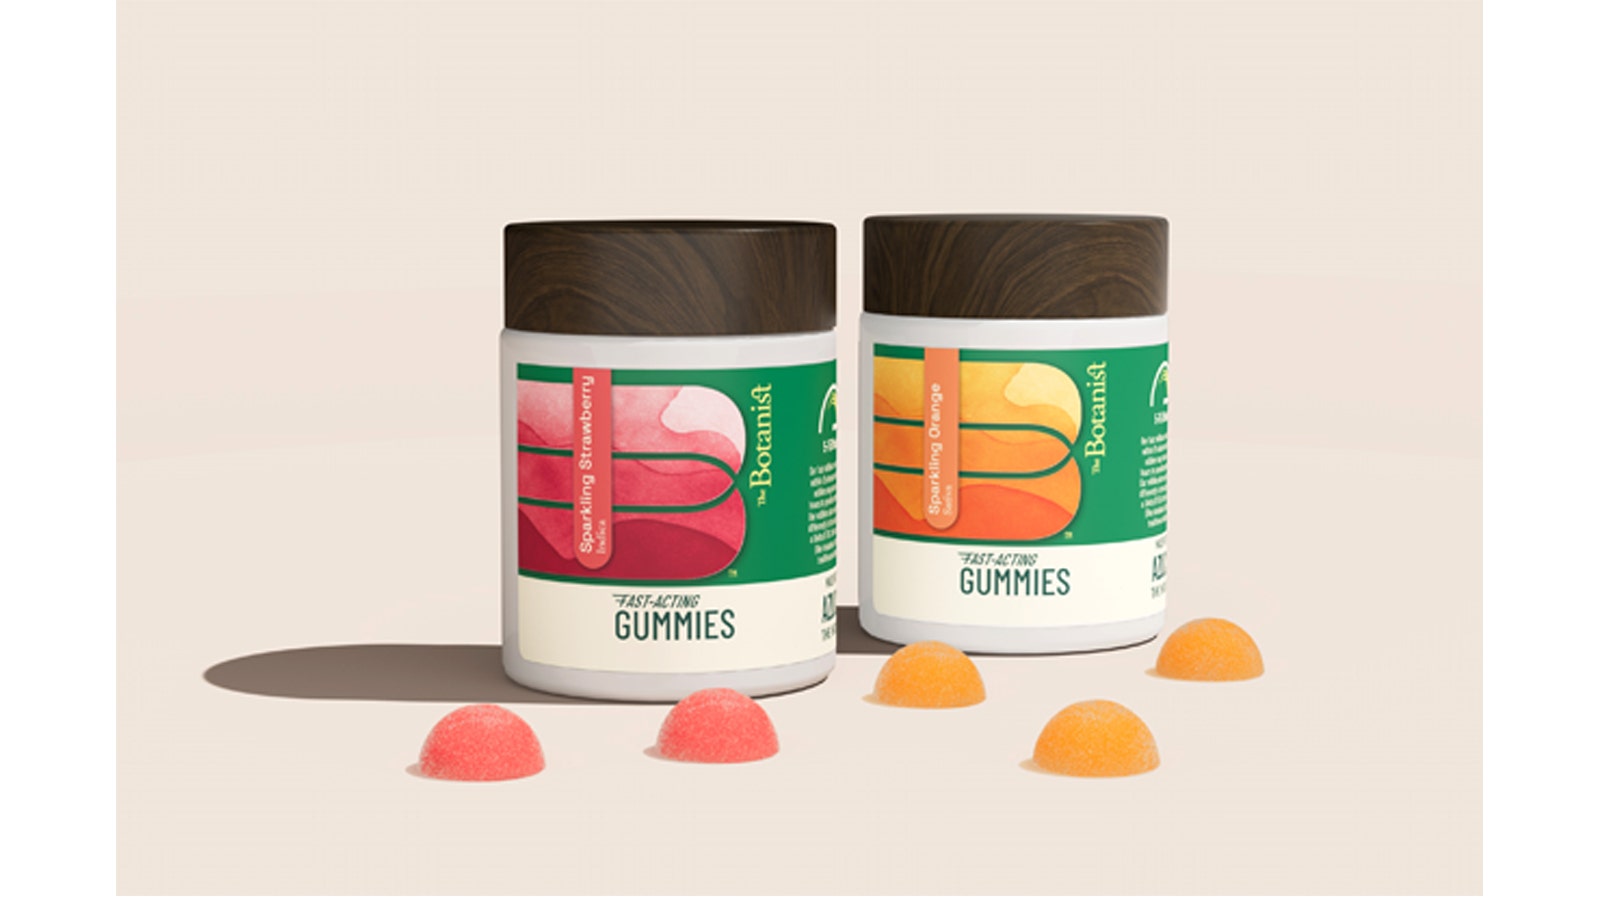 EXCLUSIVE: Experience THC Effects In 15 Minutes Or Less With New Fast-Acting Gummies From The Botanist